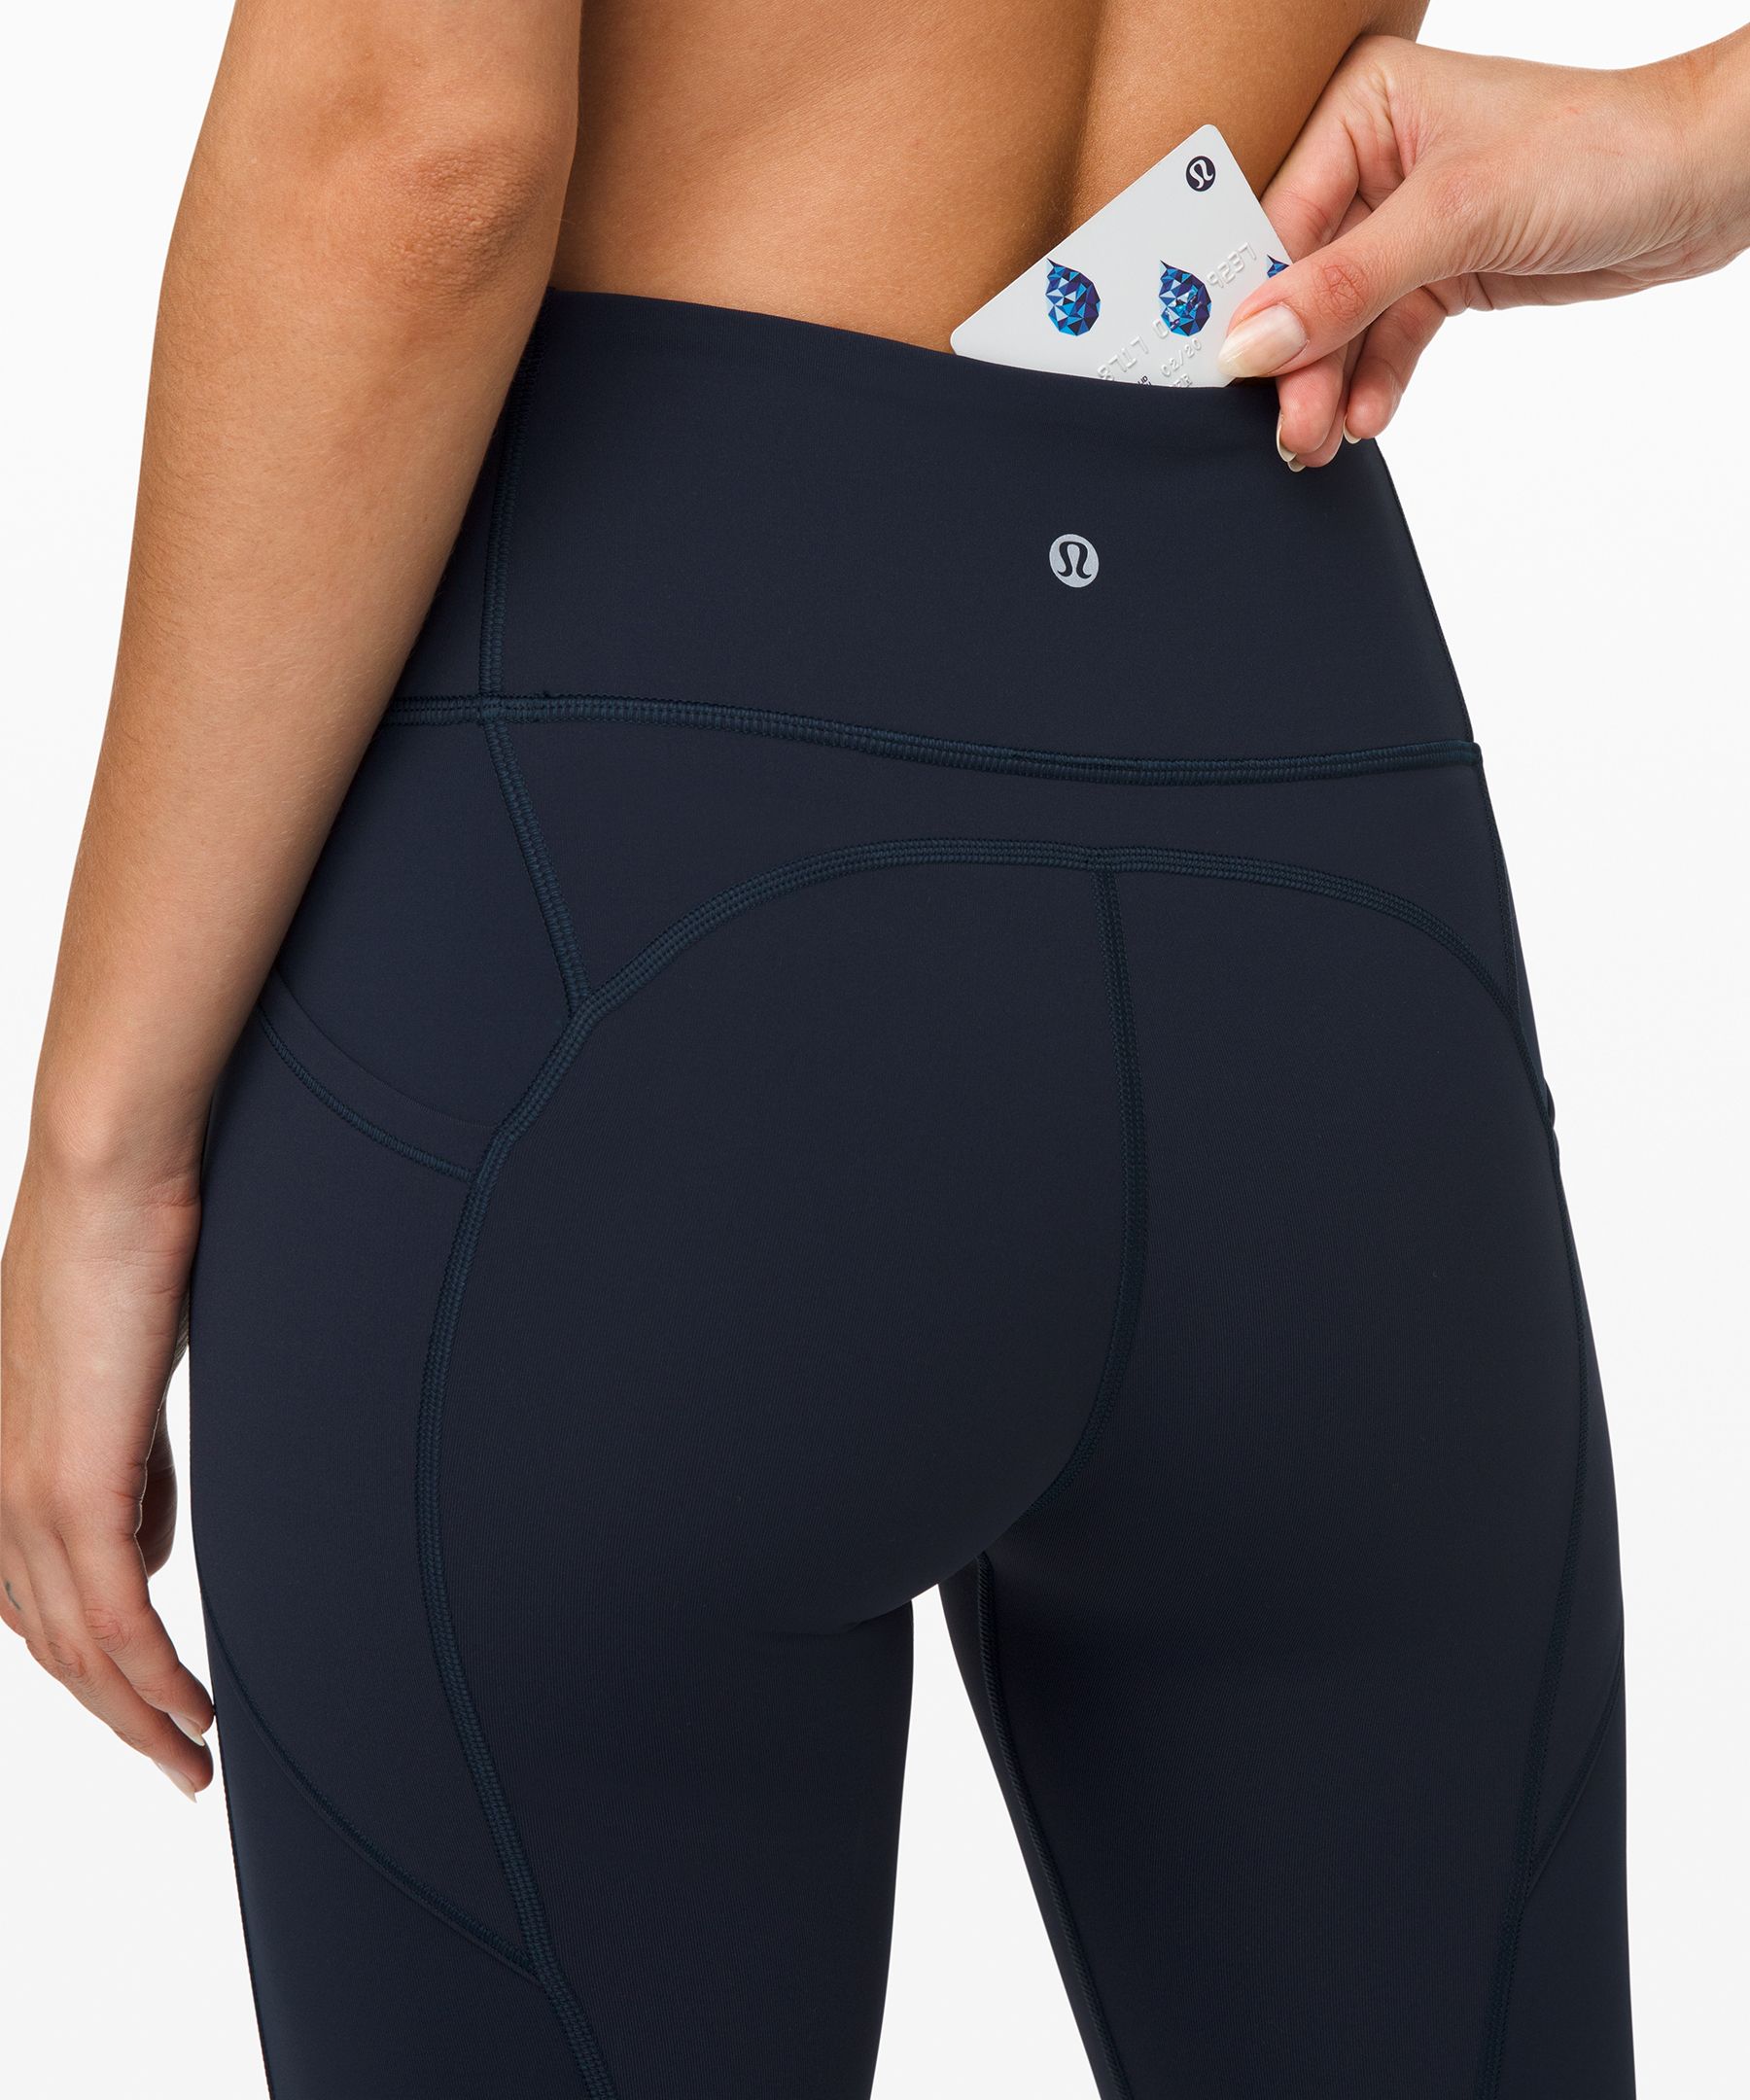 Lululemon All the Right Places Pant 28”, Women's Fashion